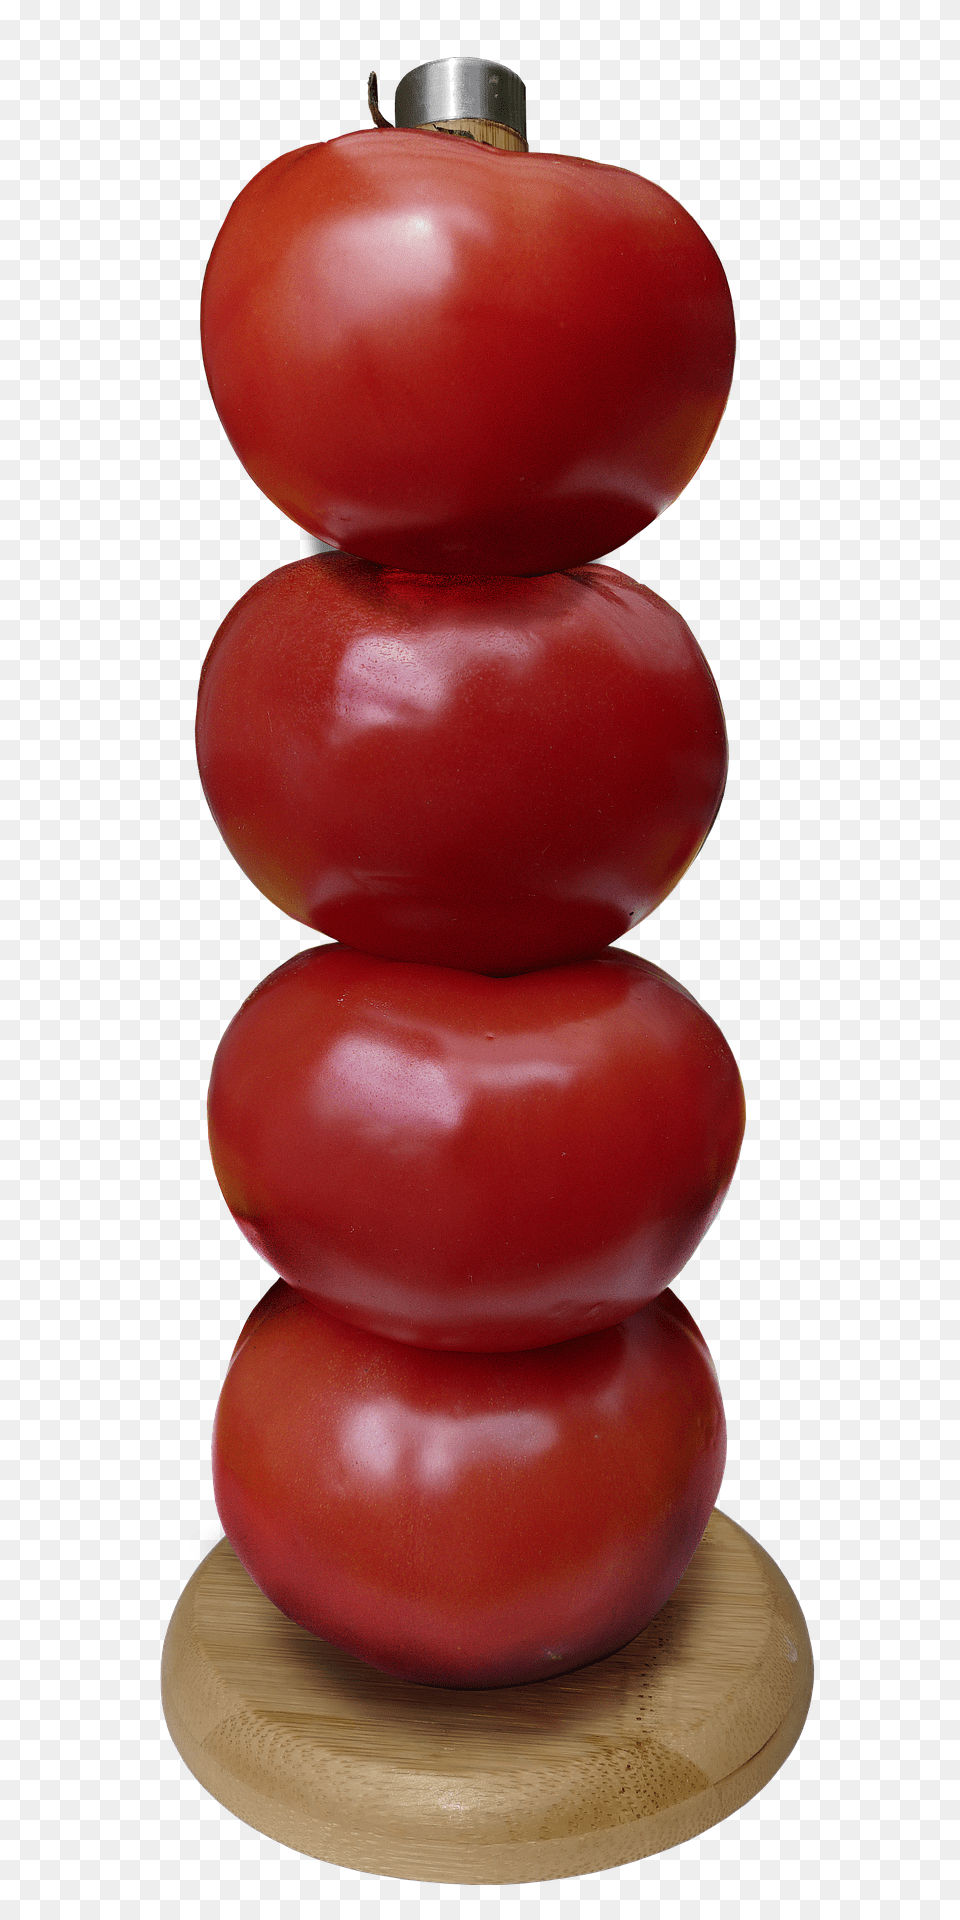 Tomato Stand Food, Plant, Produce, Vegetable Png Image